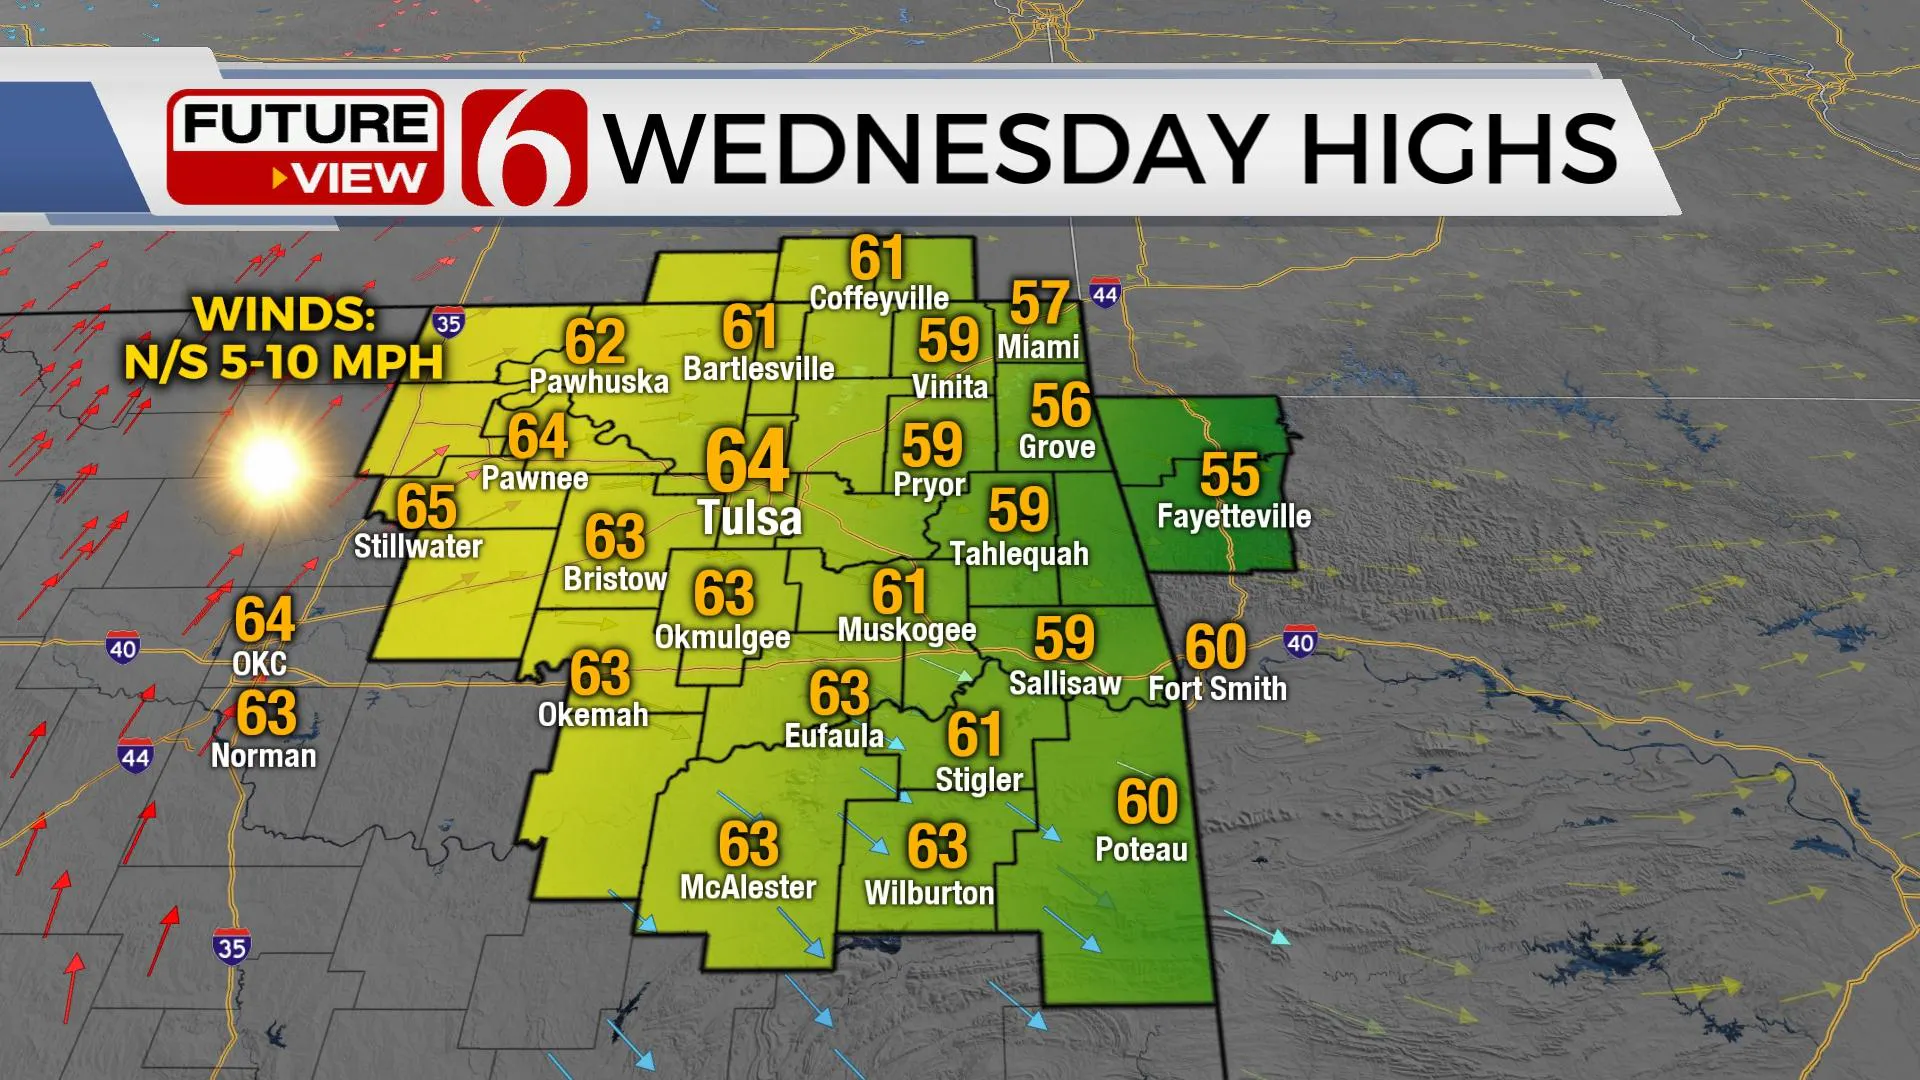 Wednesday high temperatures.